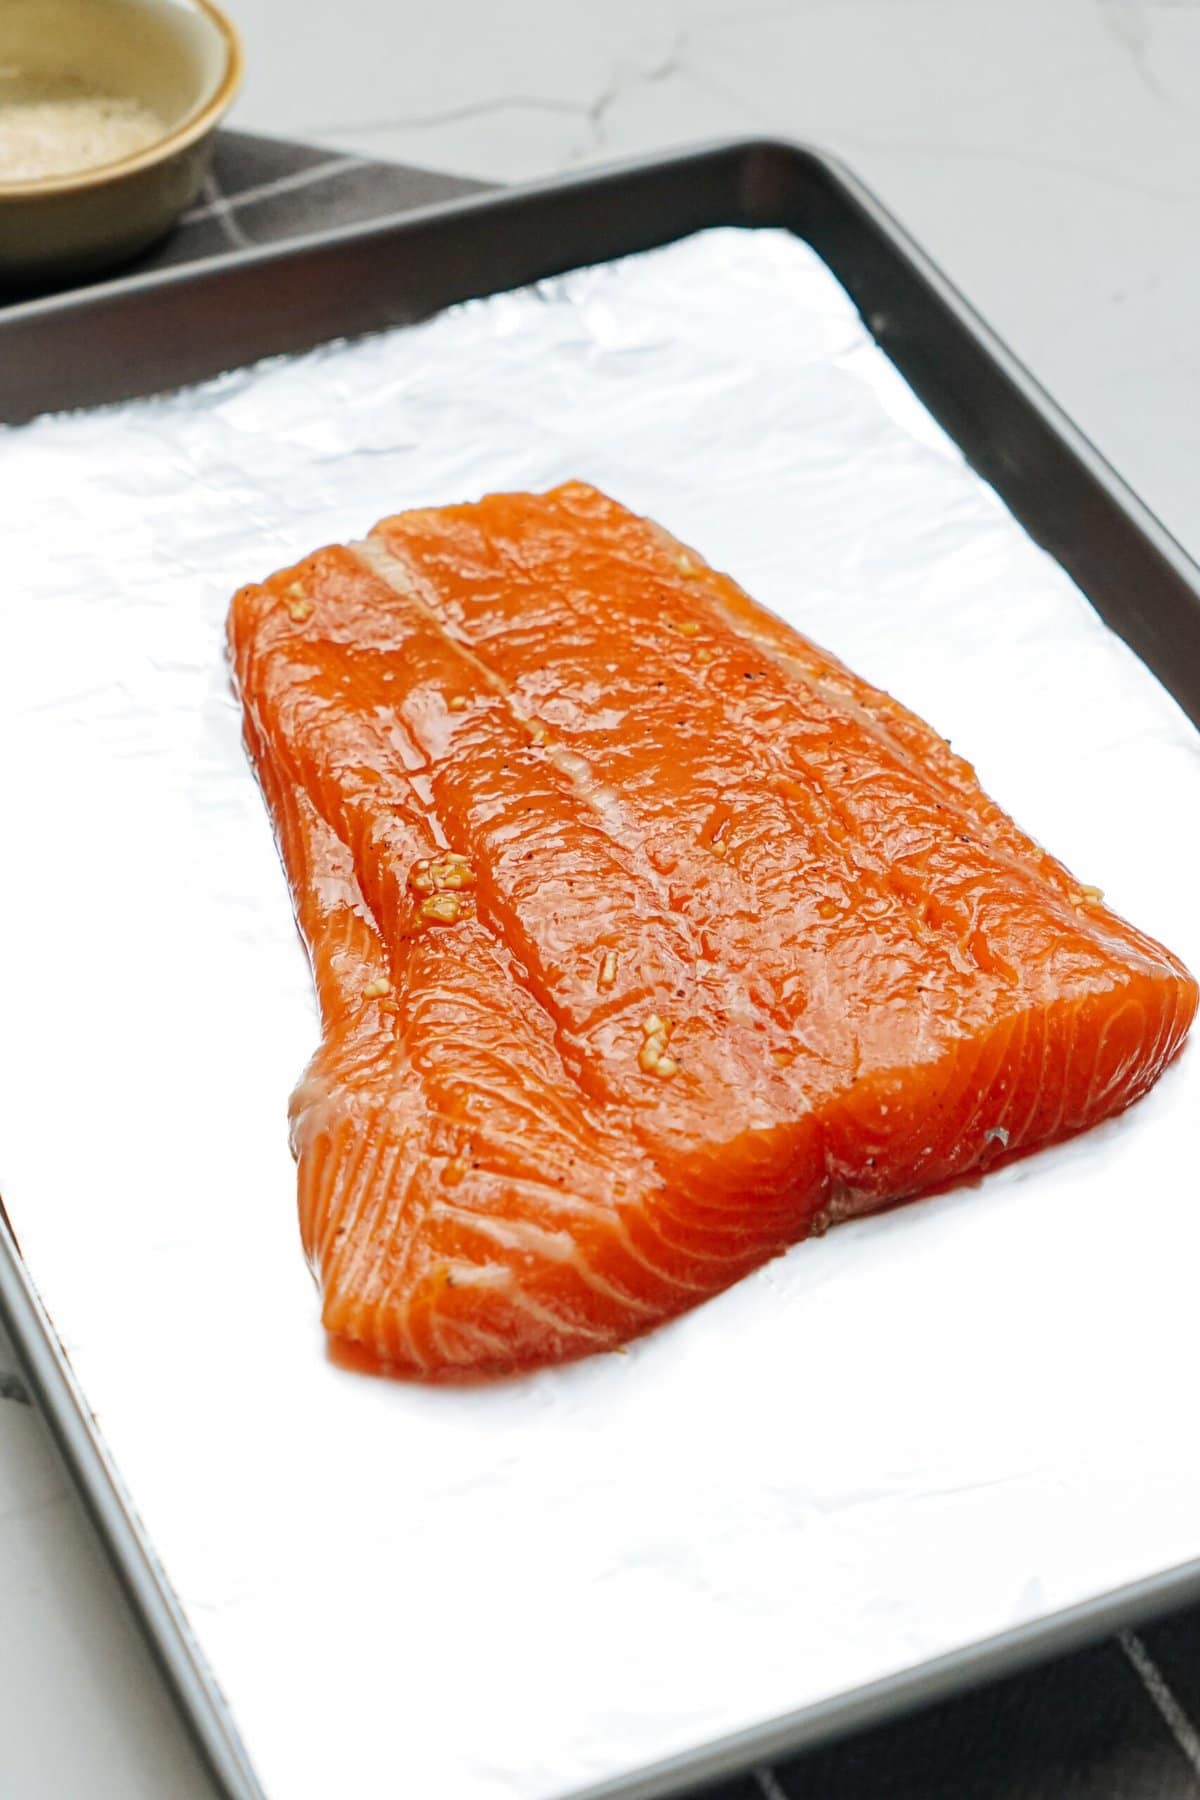 Salmon fillet on a baking sheet, ready to be cooked.